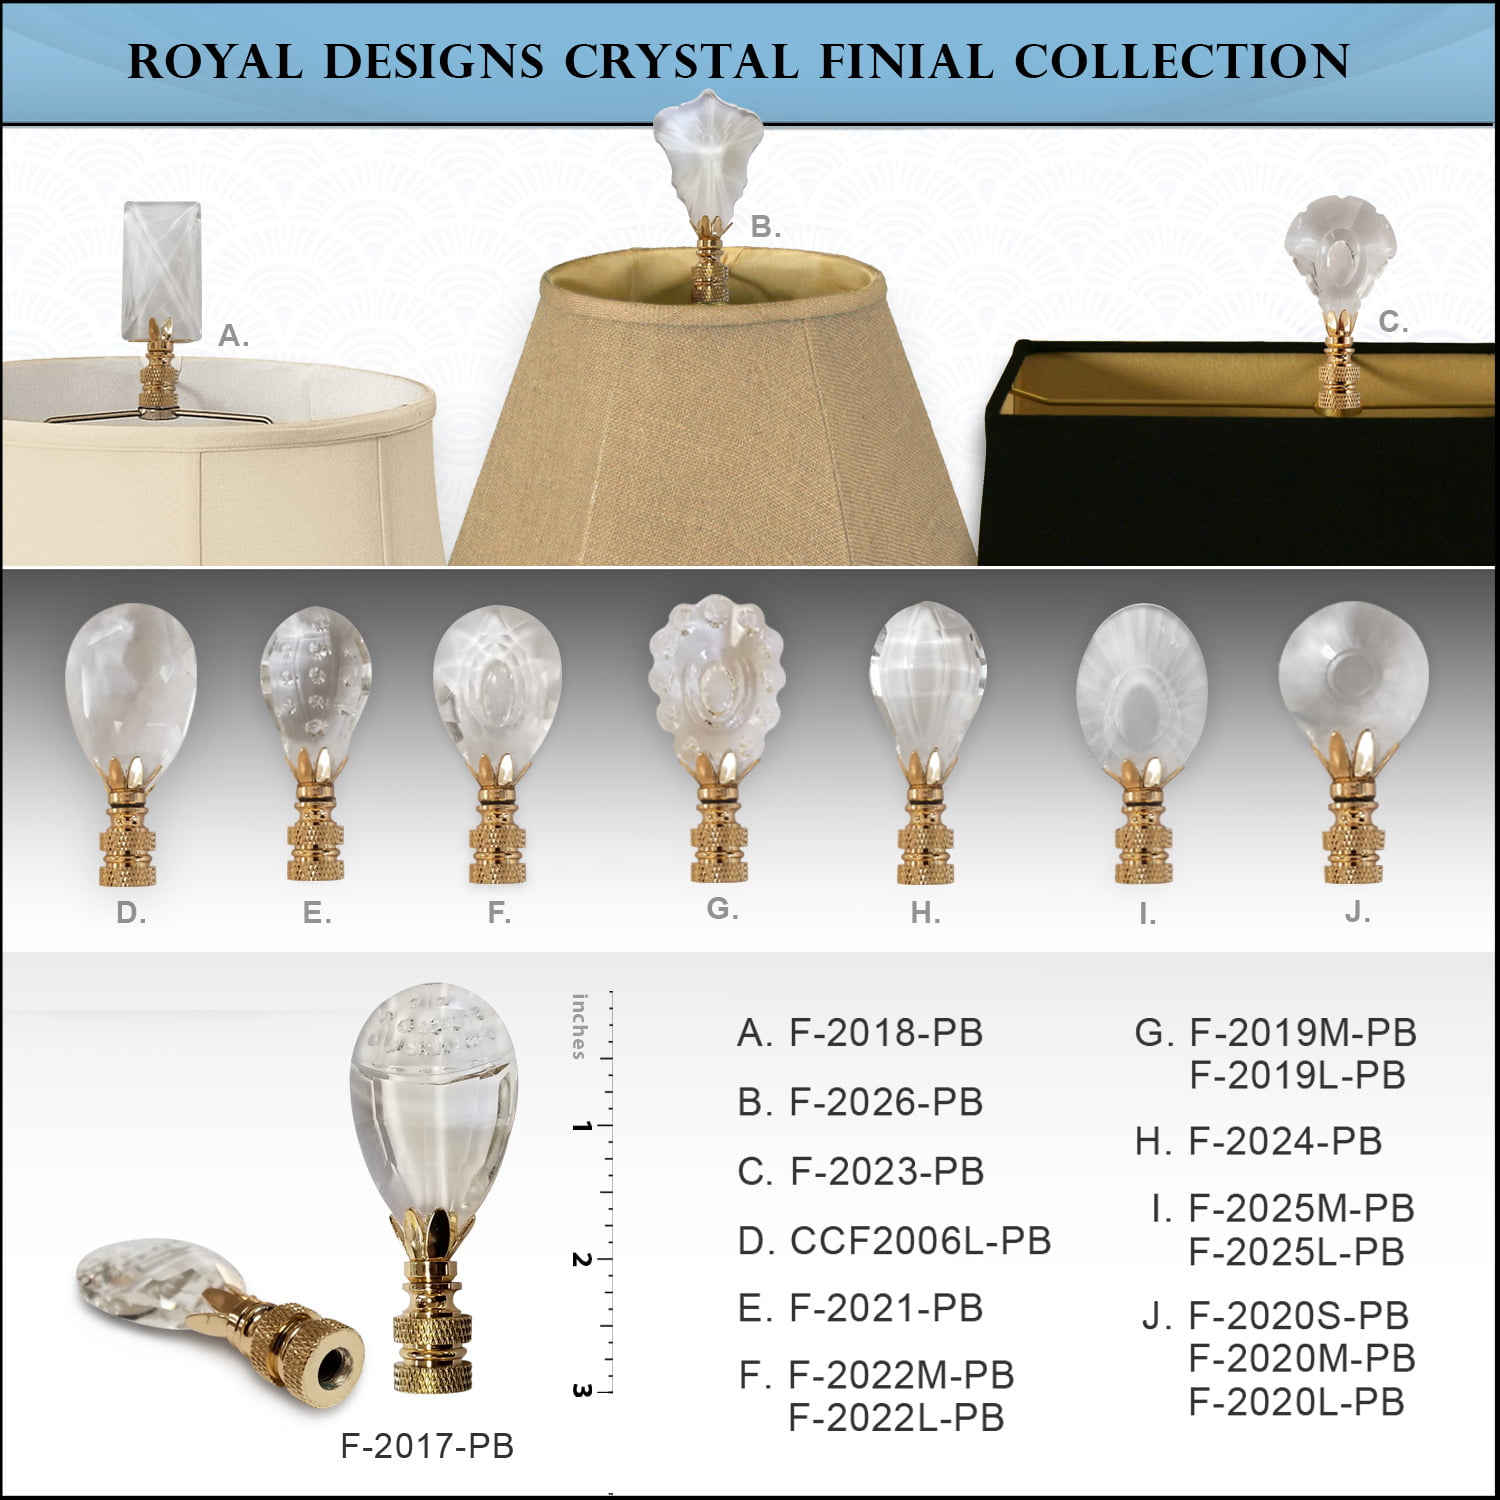 MULTI  FACETED  LEAD  CRYSTAL  ELECTRIC  LIGHTING  LAMP  SHADE  FINIAL B 